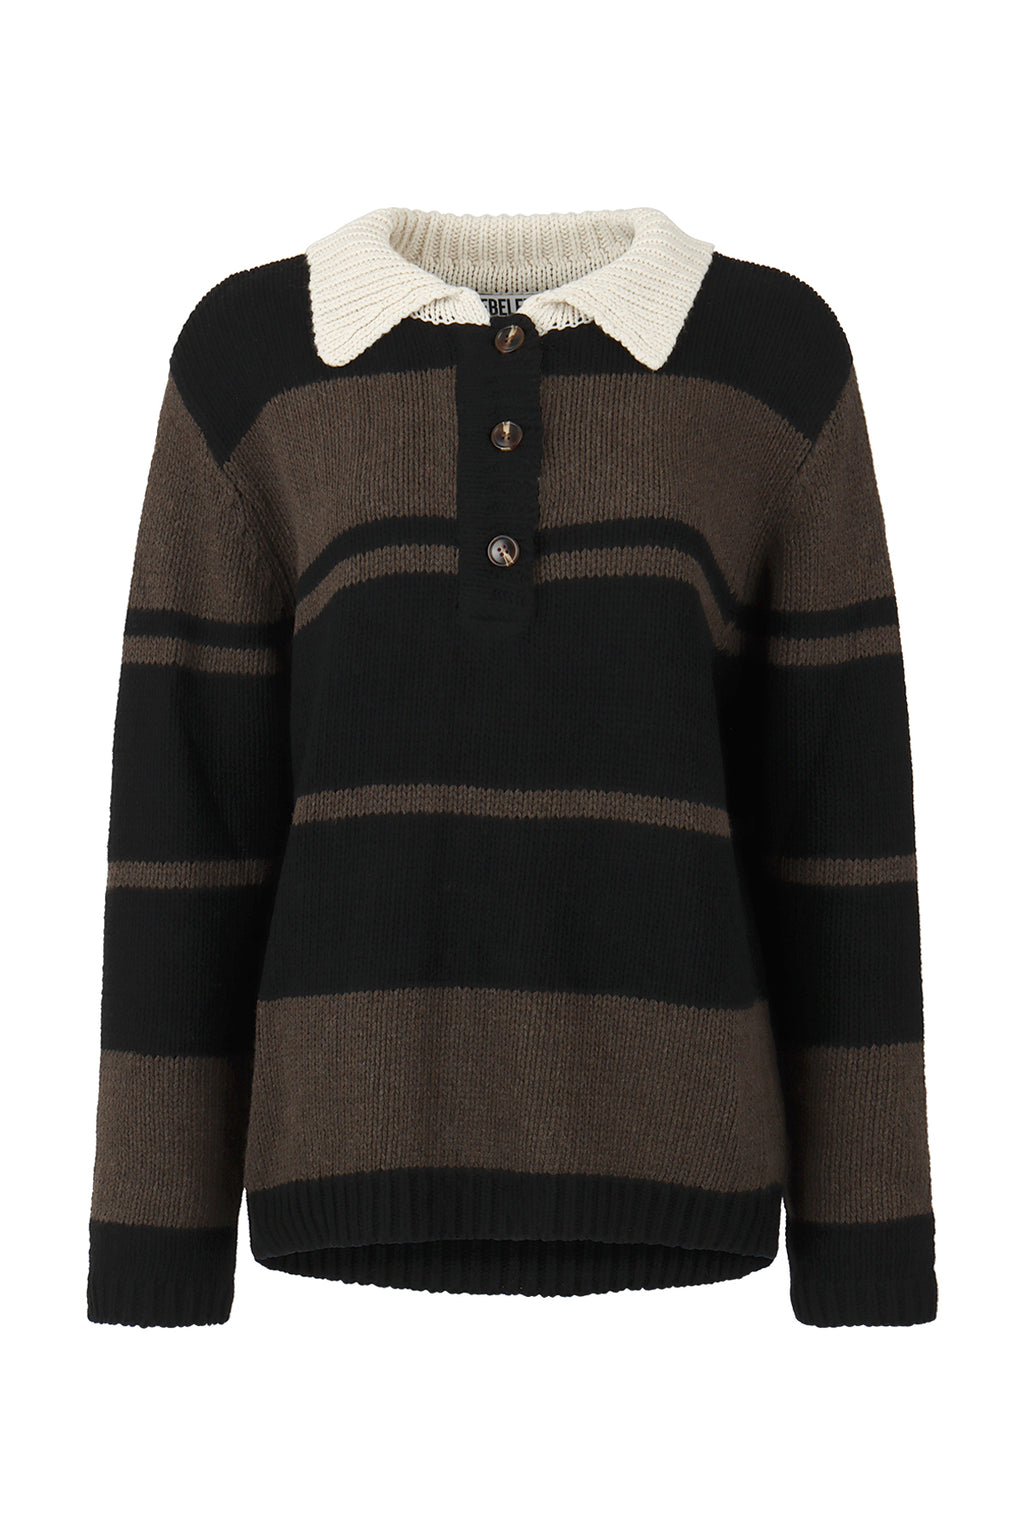 Varsity Brown and Black Striped Oversized Sweater